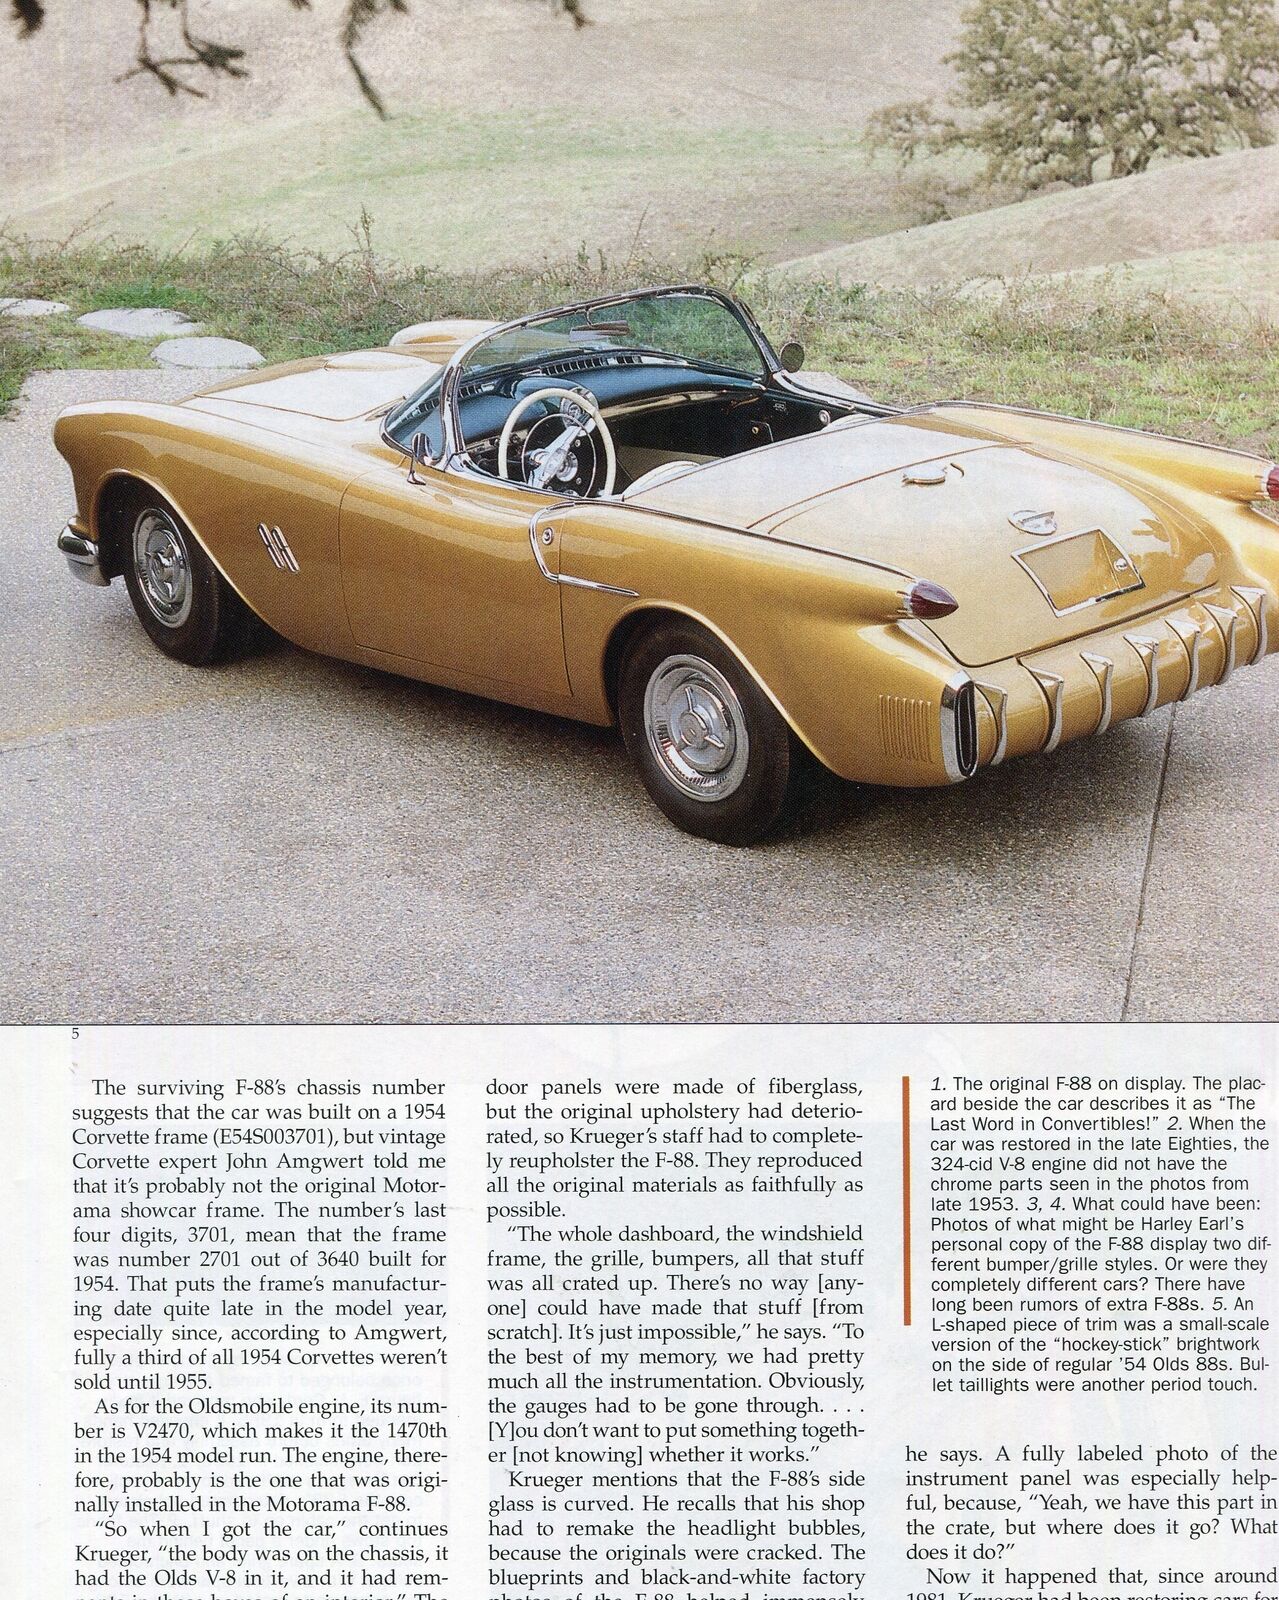 1954 OLDSMOBILE F-88 SHOW CAR 13 page Color Article